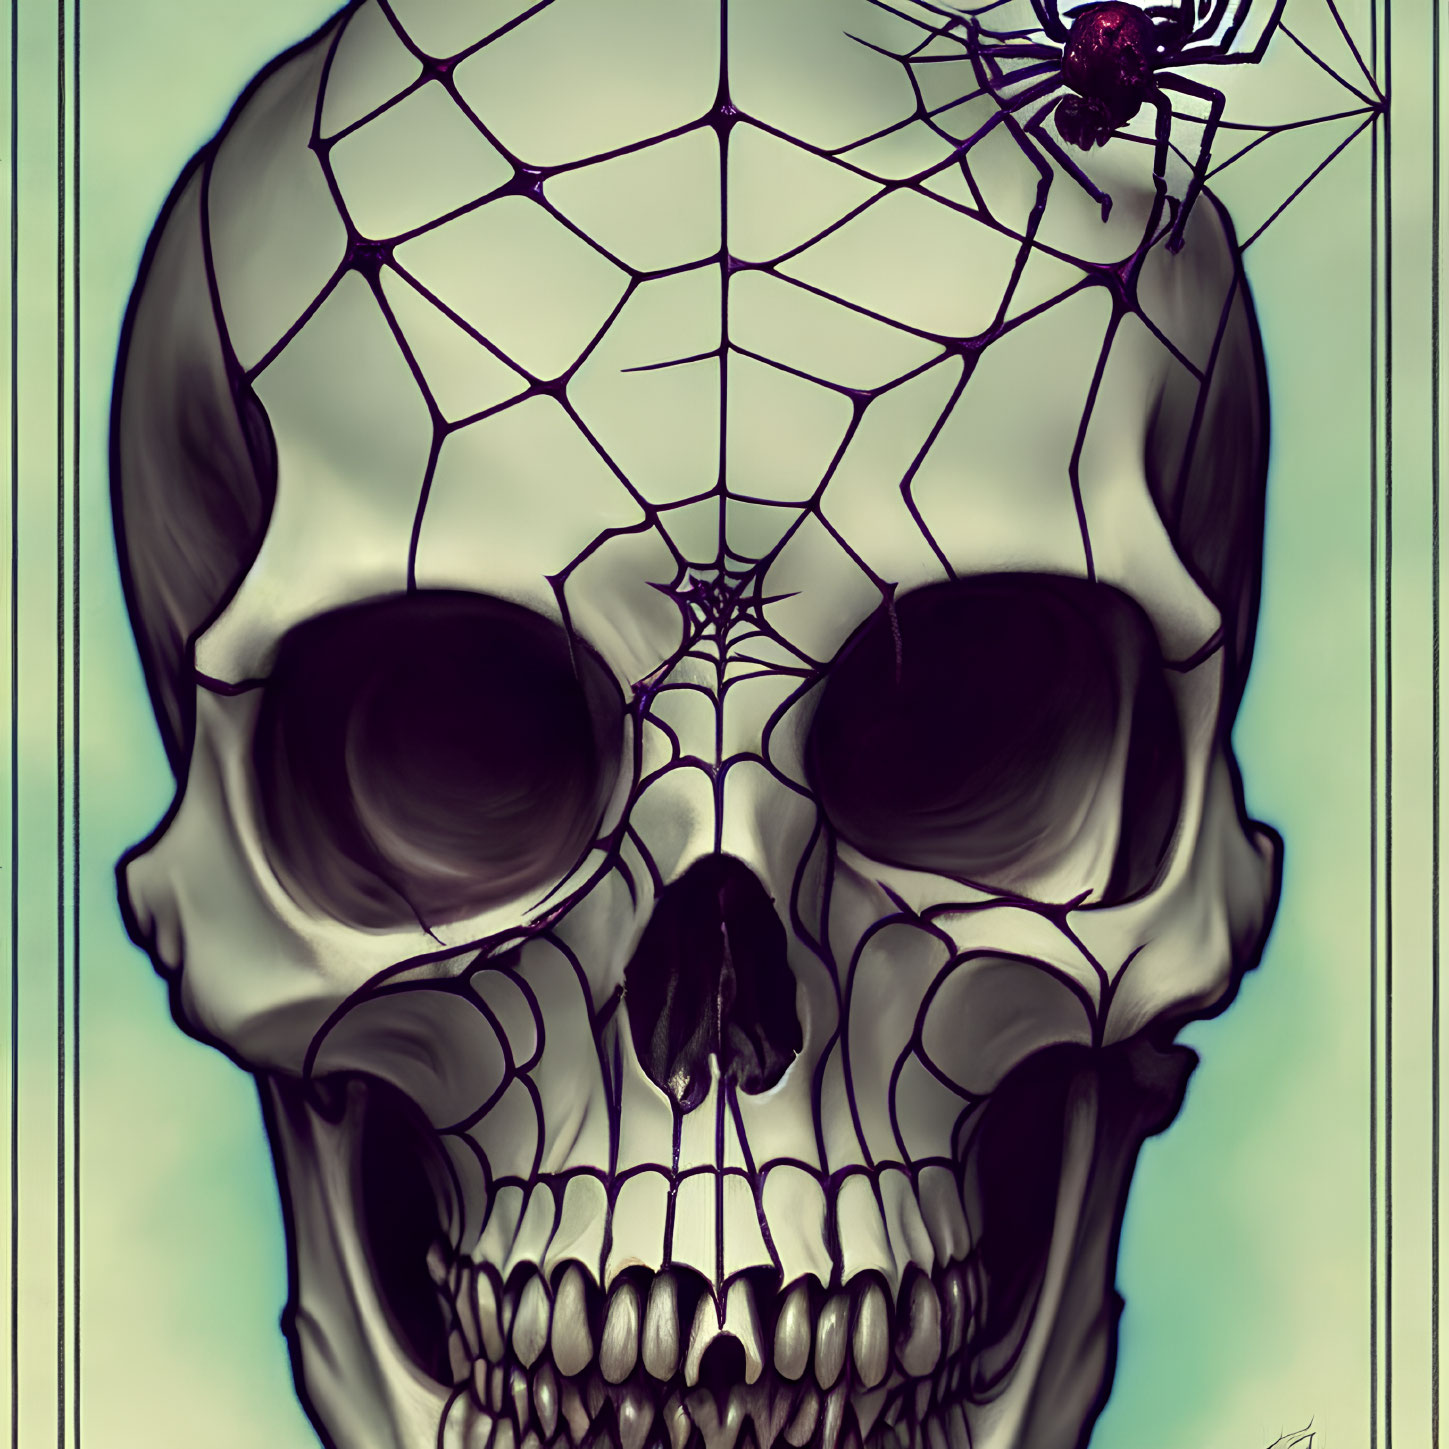 Human skull illustration with spider and web on forehead, against muted backdrop